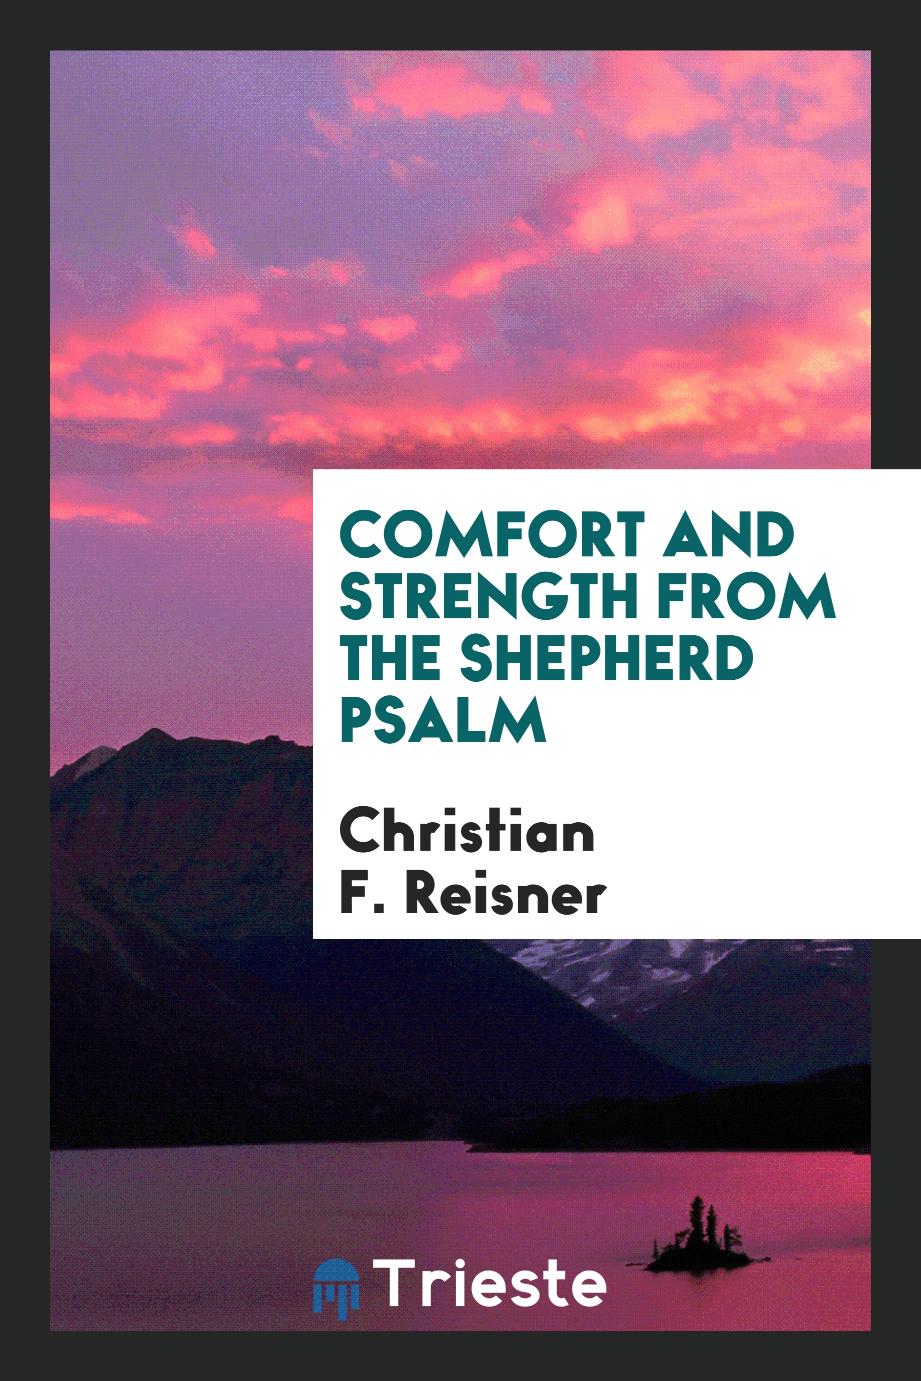 Comfort and strength from the Shepherd psalm